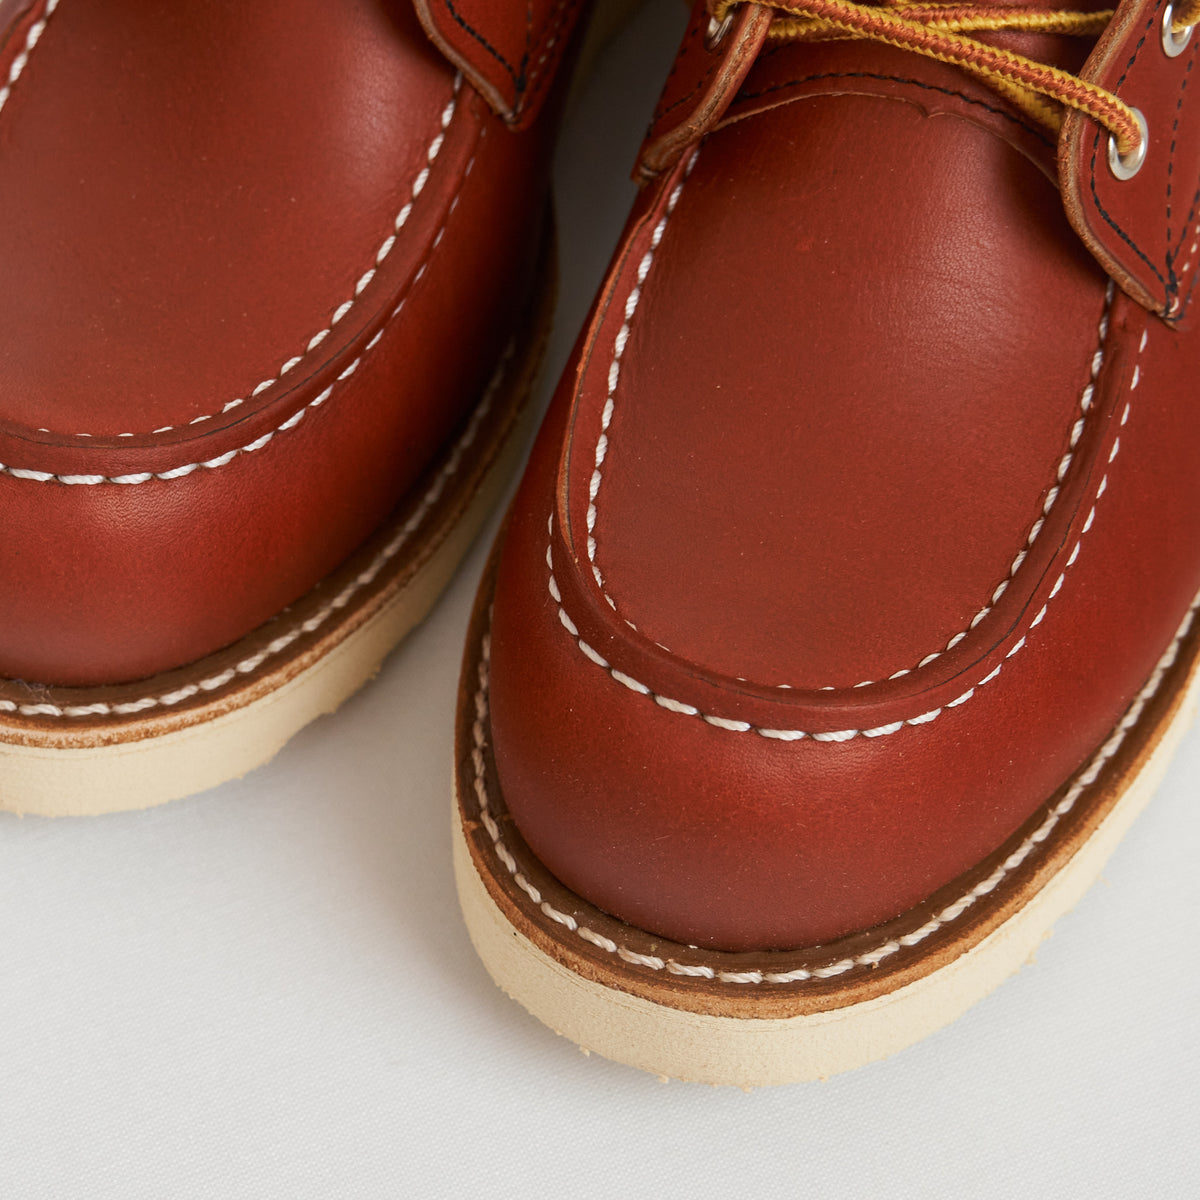 Red Wing Heritage Shoes Classic Moc-Toe 8890, 875, 8131, 8138, 8849